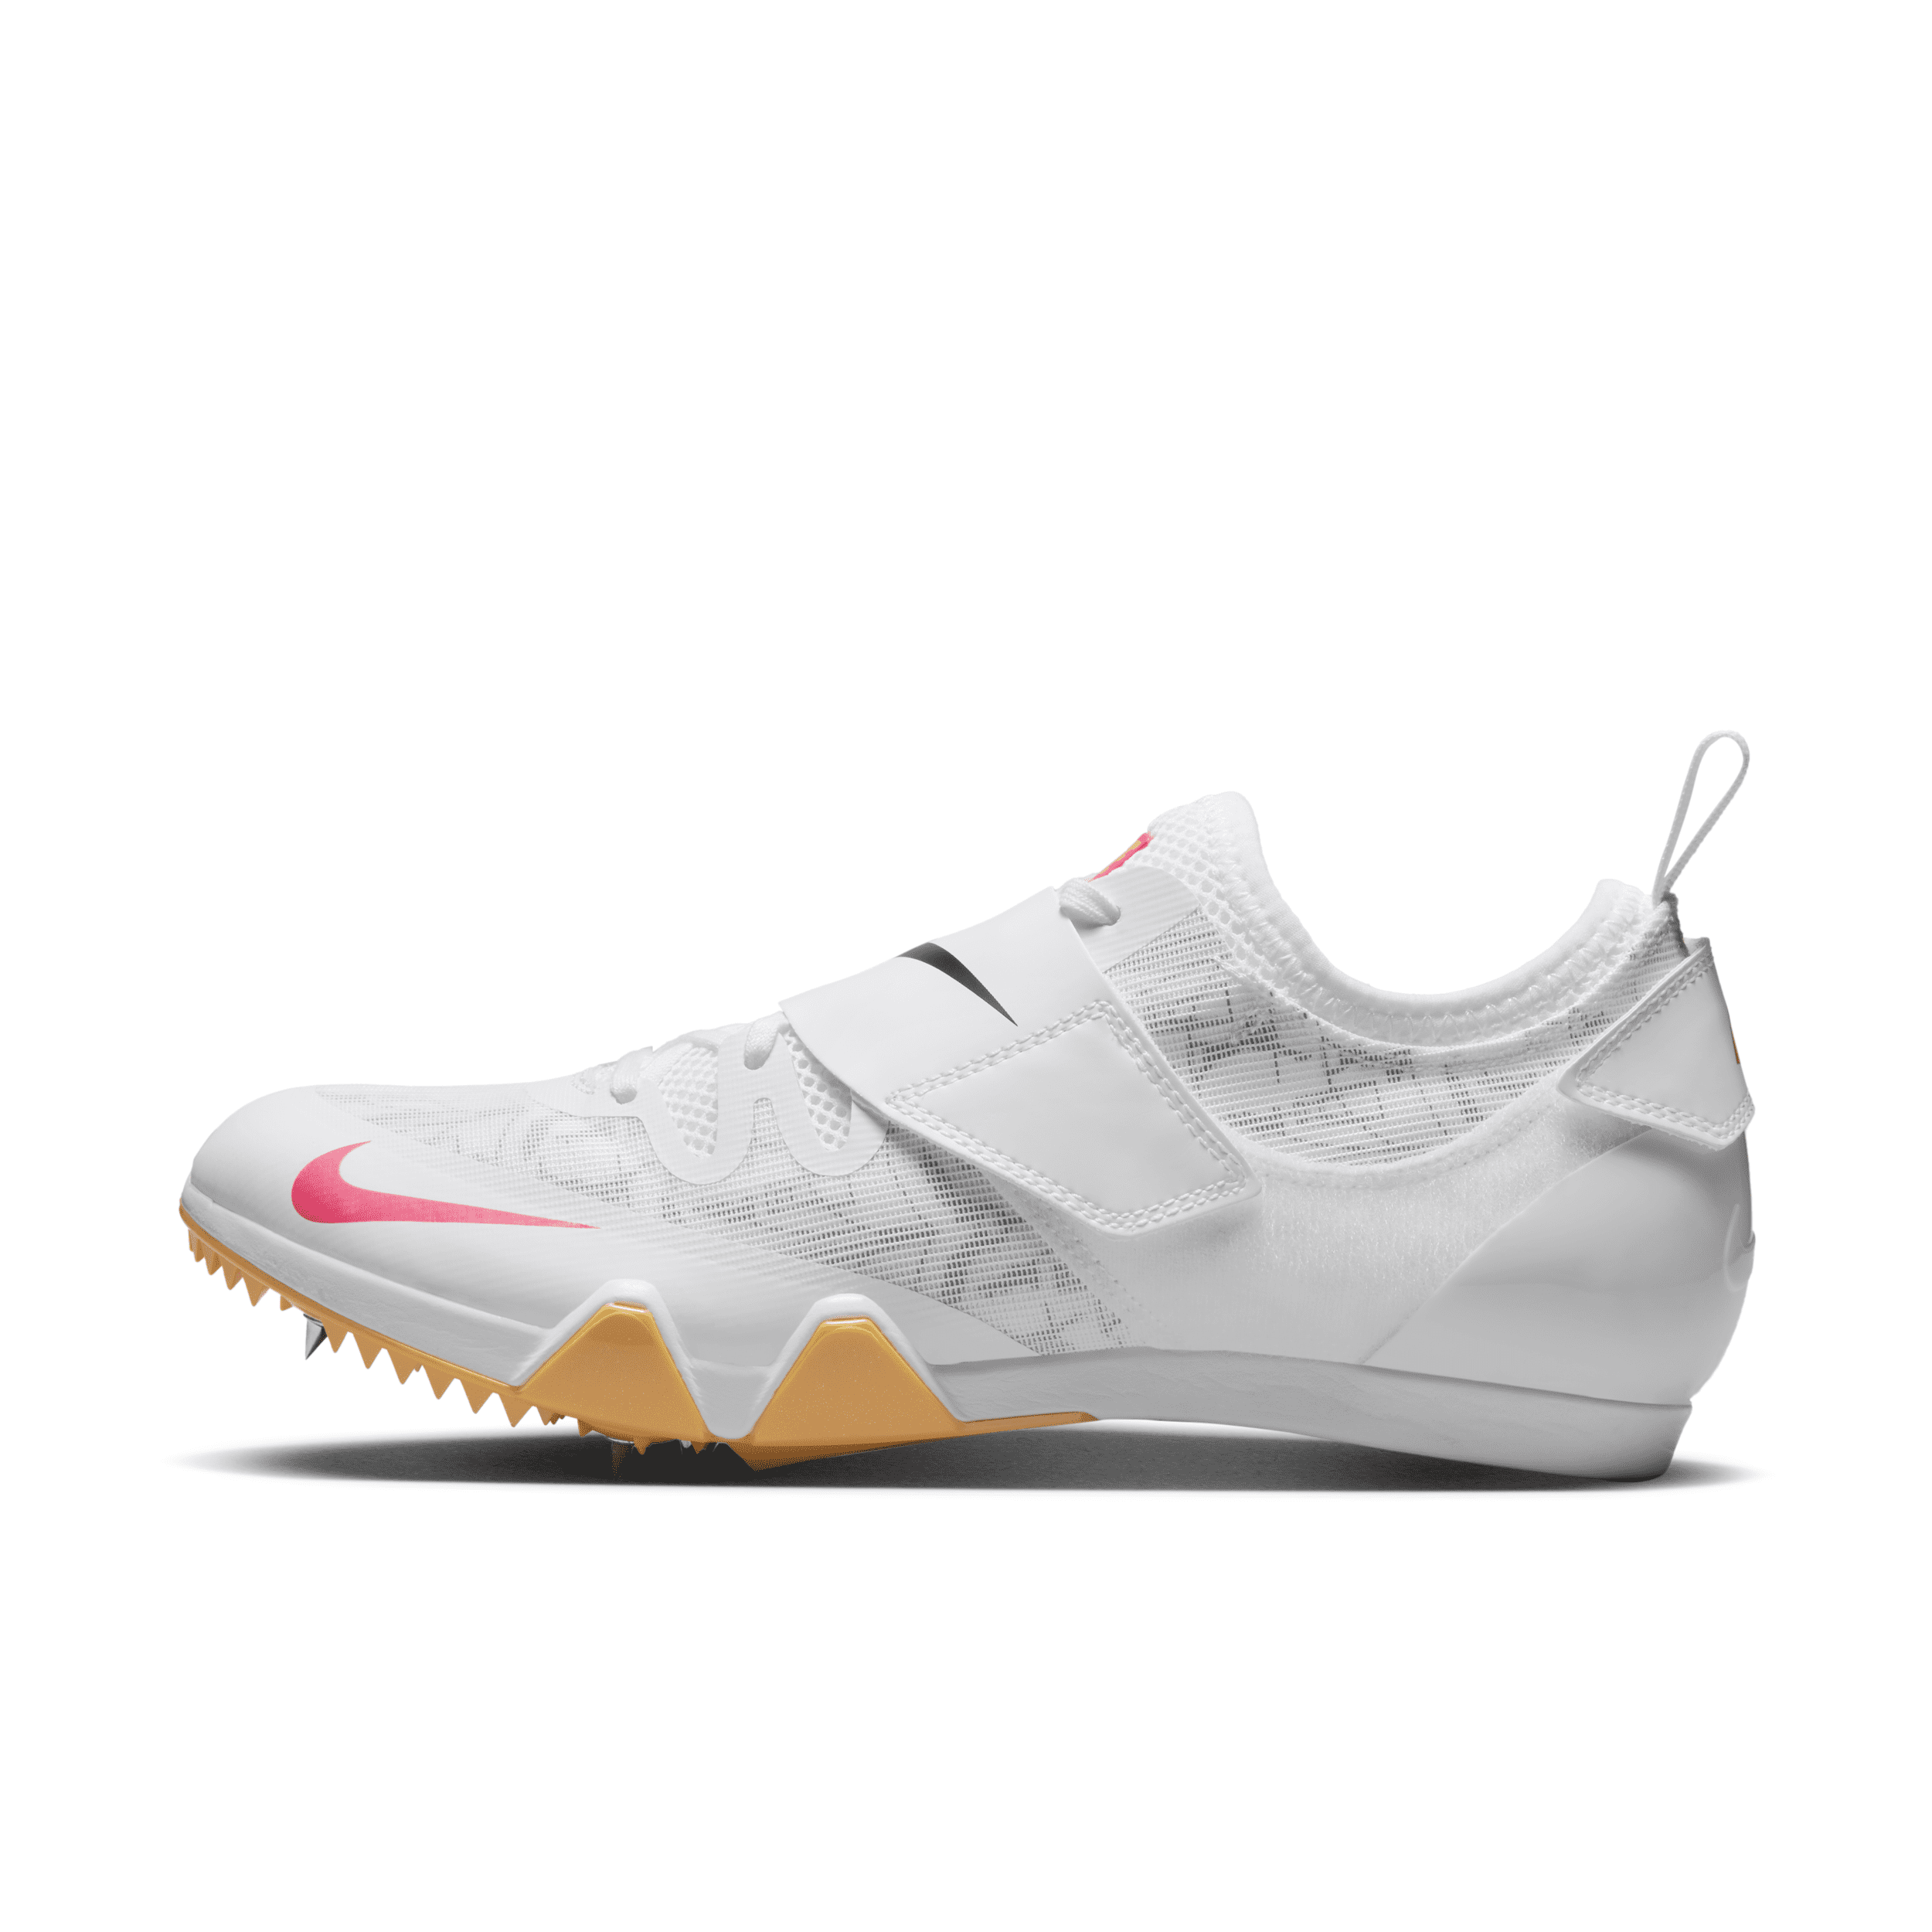 Nike Unisex Pole Vault Elite Track & Field Jumping Spikes In White